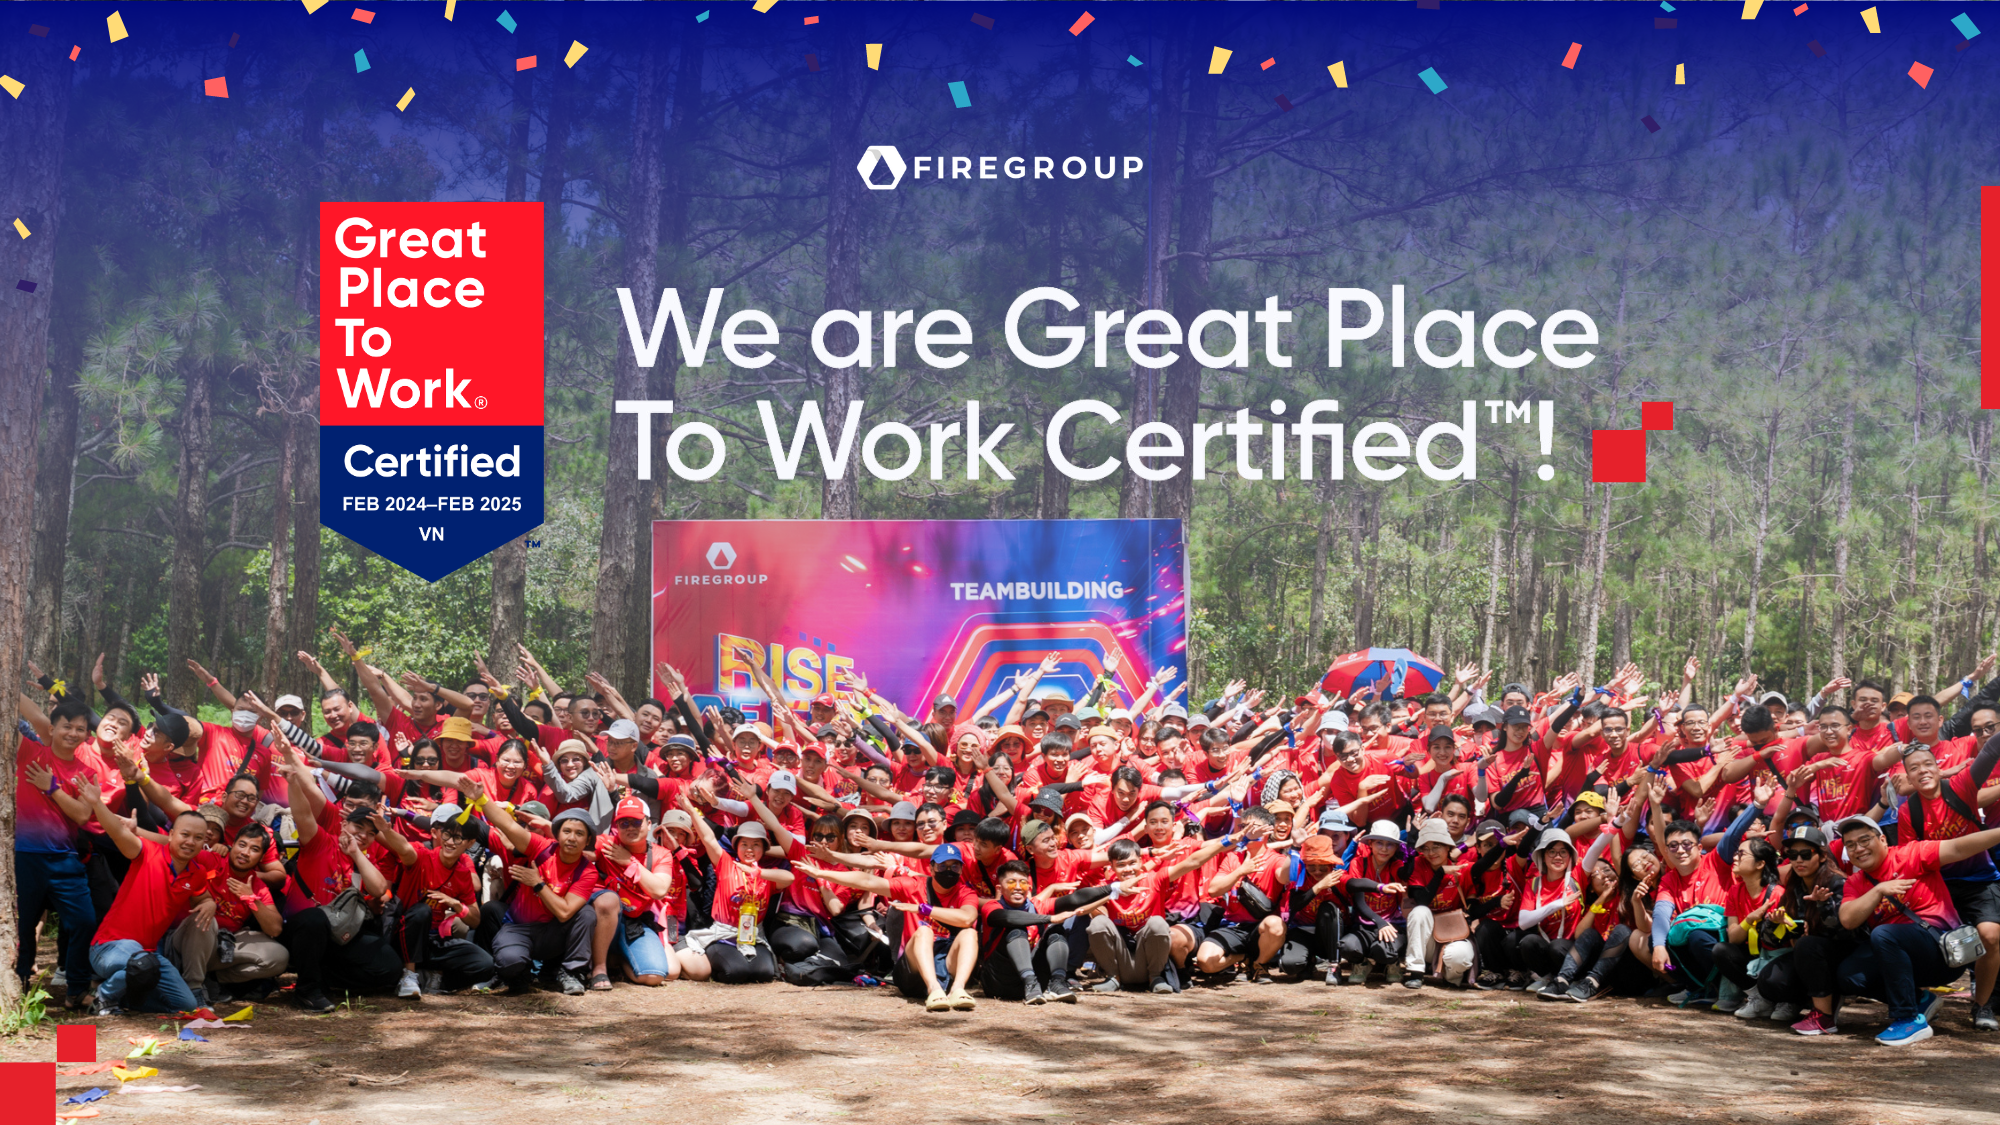 FireGroup Certified as Great Place To Work™: Fostering our journey to build a great culture for our people